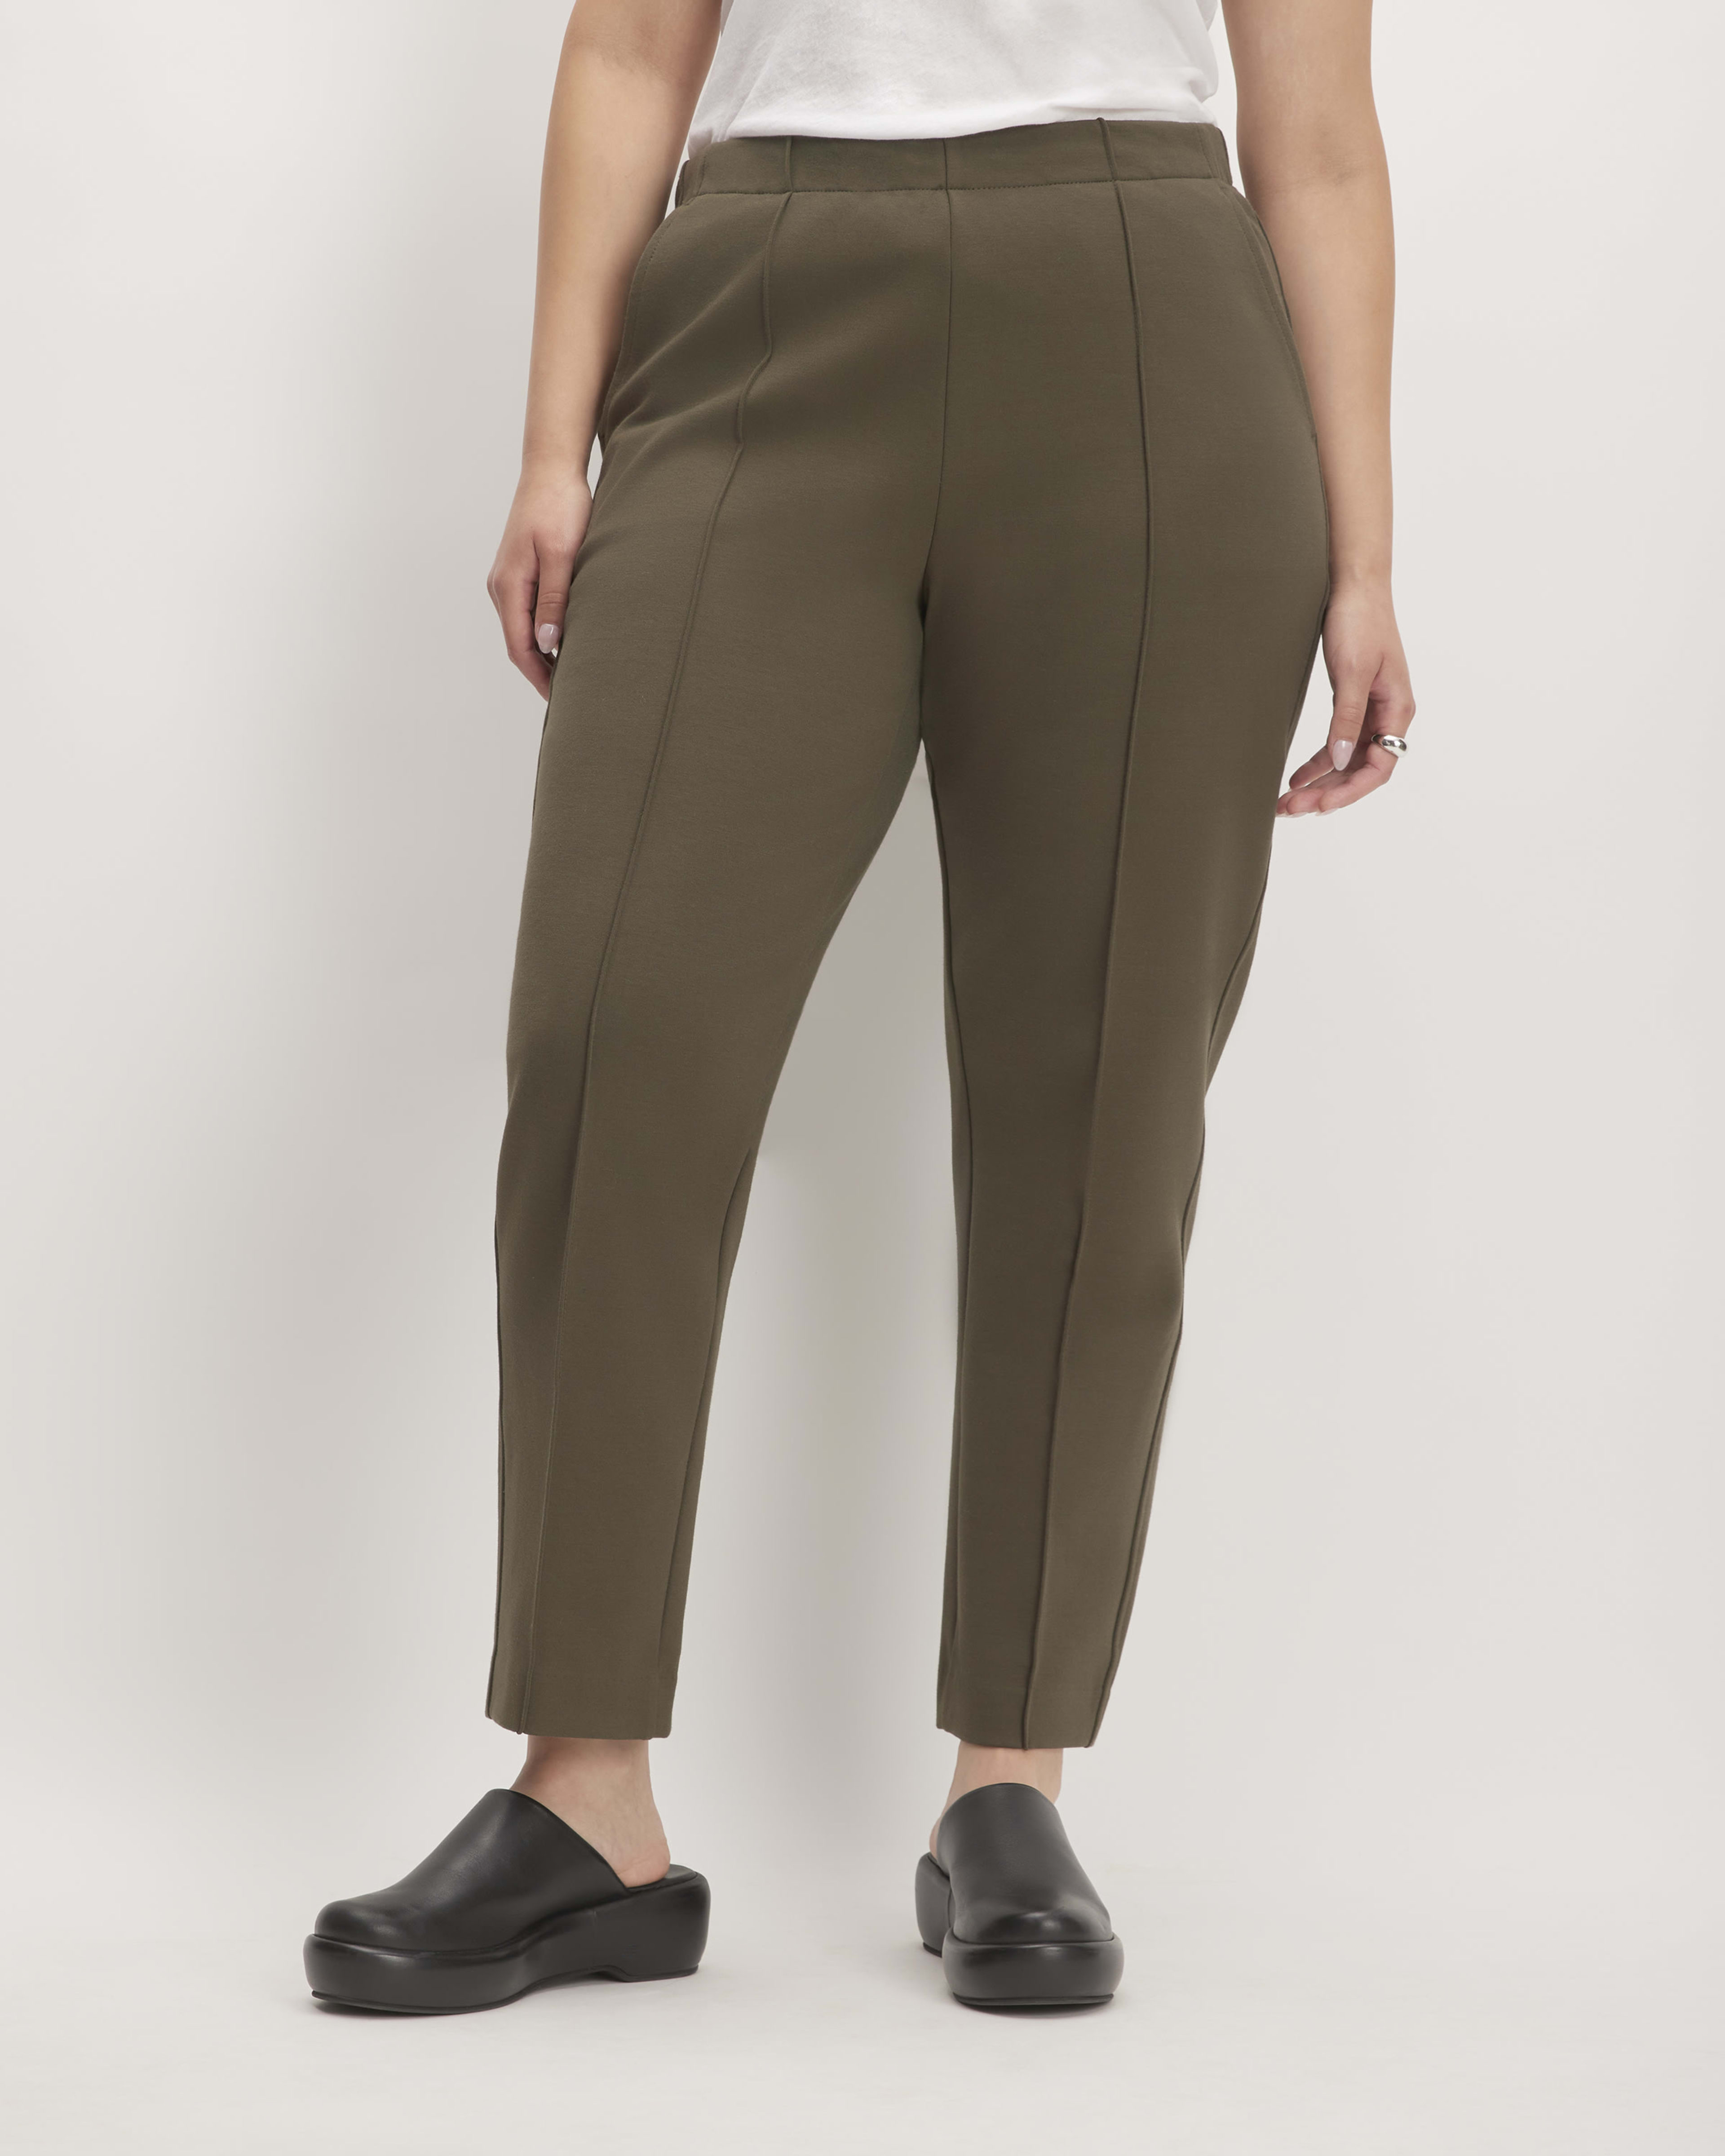 Everlane Perform Legging Review (one c/o, others not) and Giveaway!  {Closed} — Fairly Curated